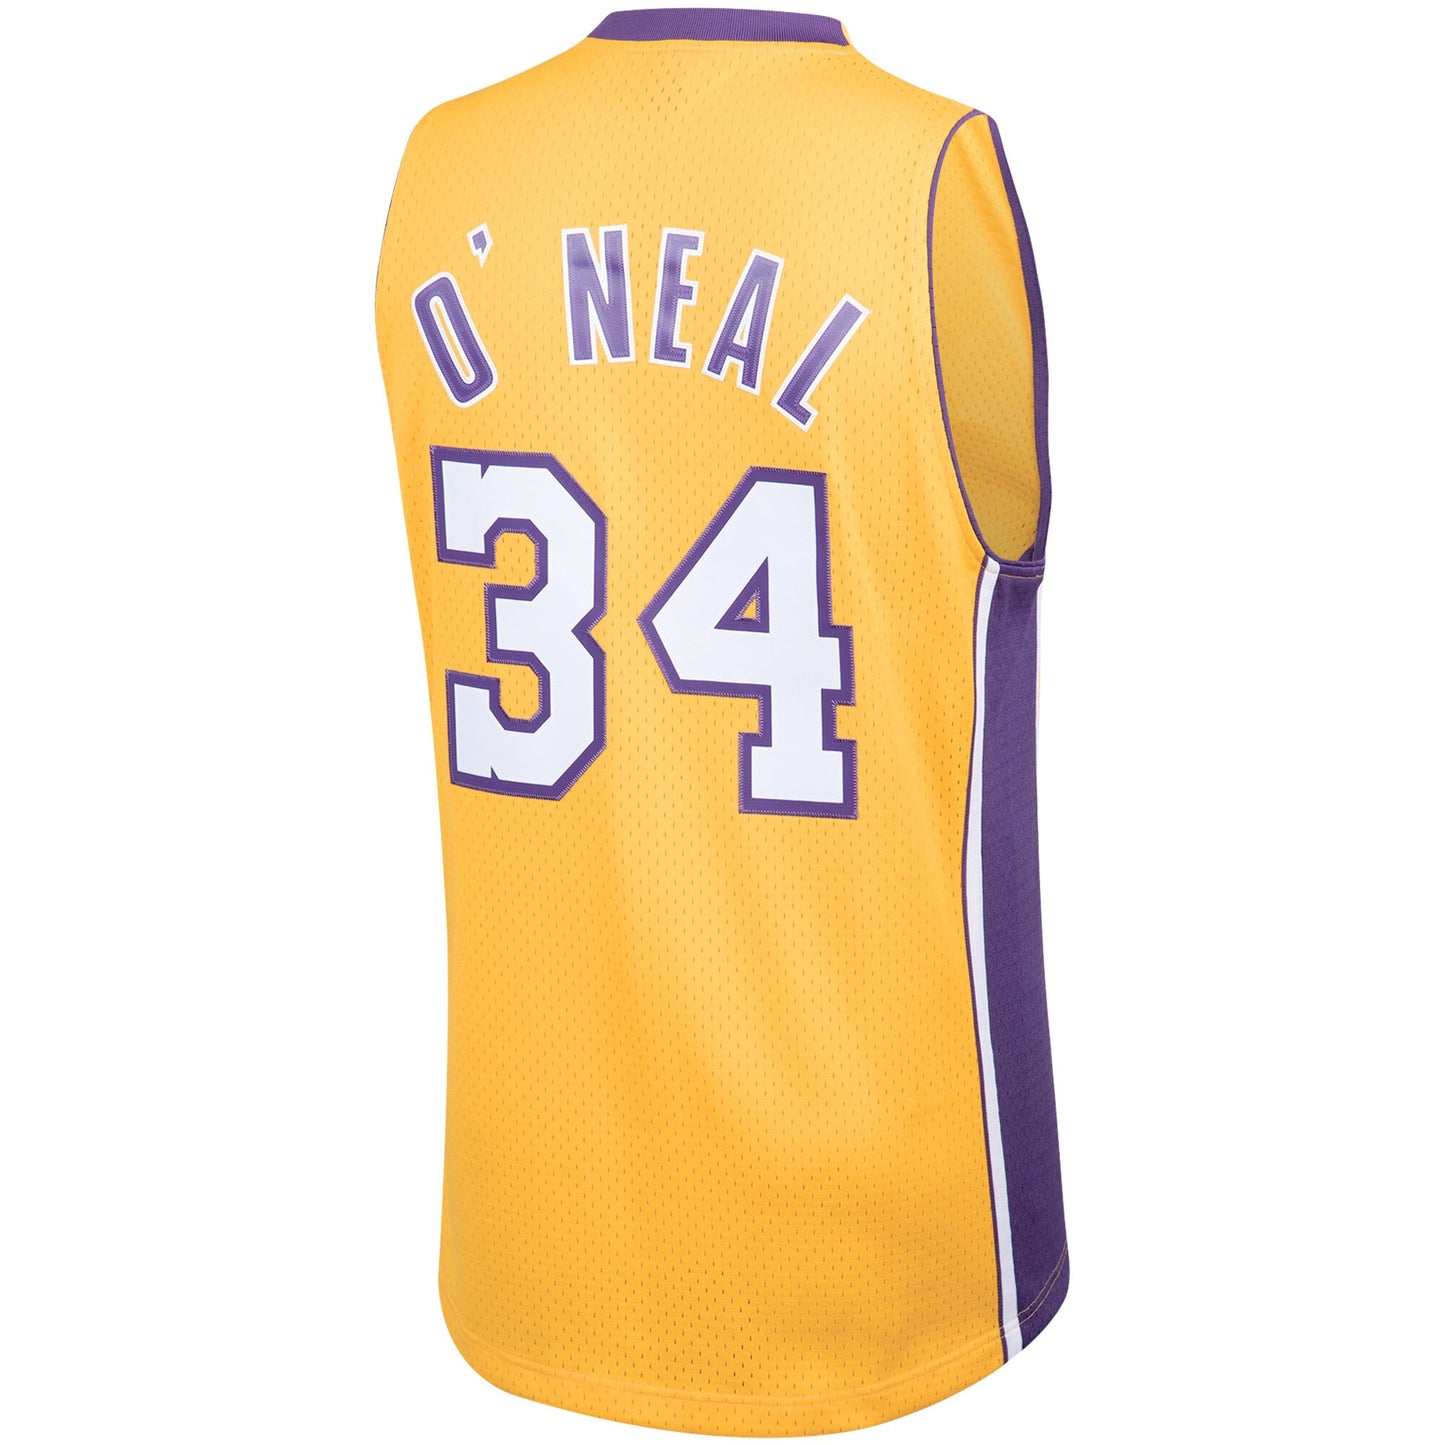 Jersey Mitchell & Ness Los Angeles Lakers #34 Shaquille O'Neal